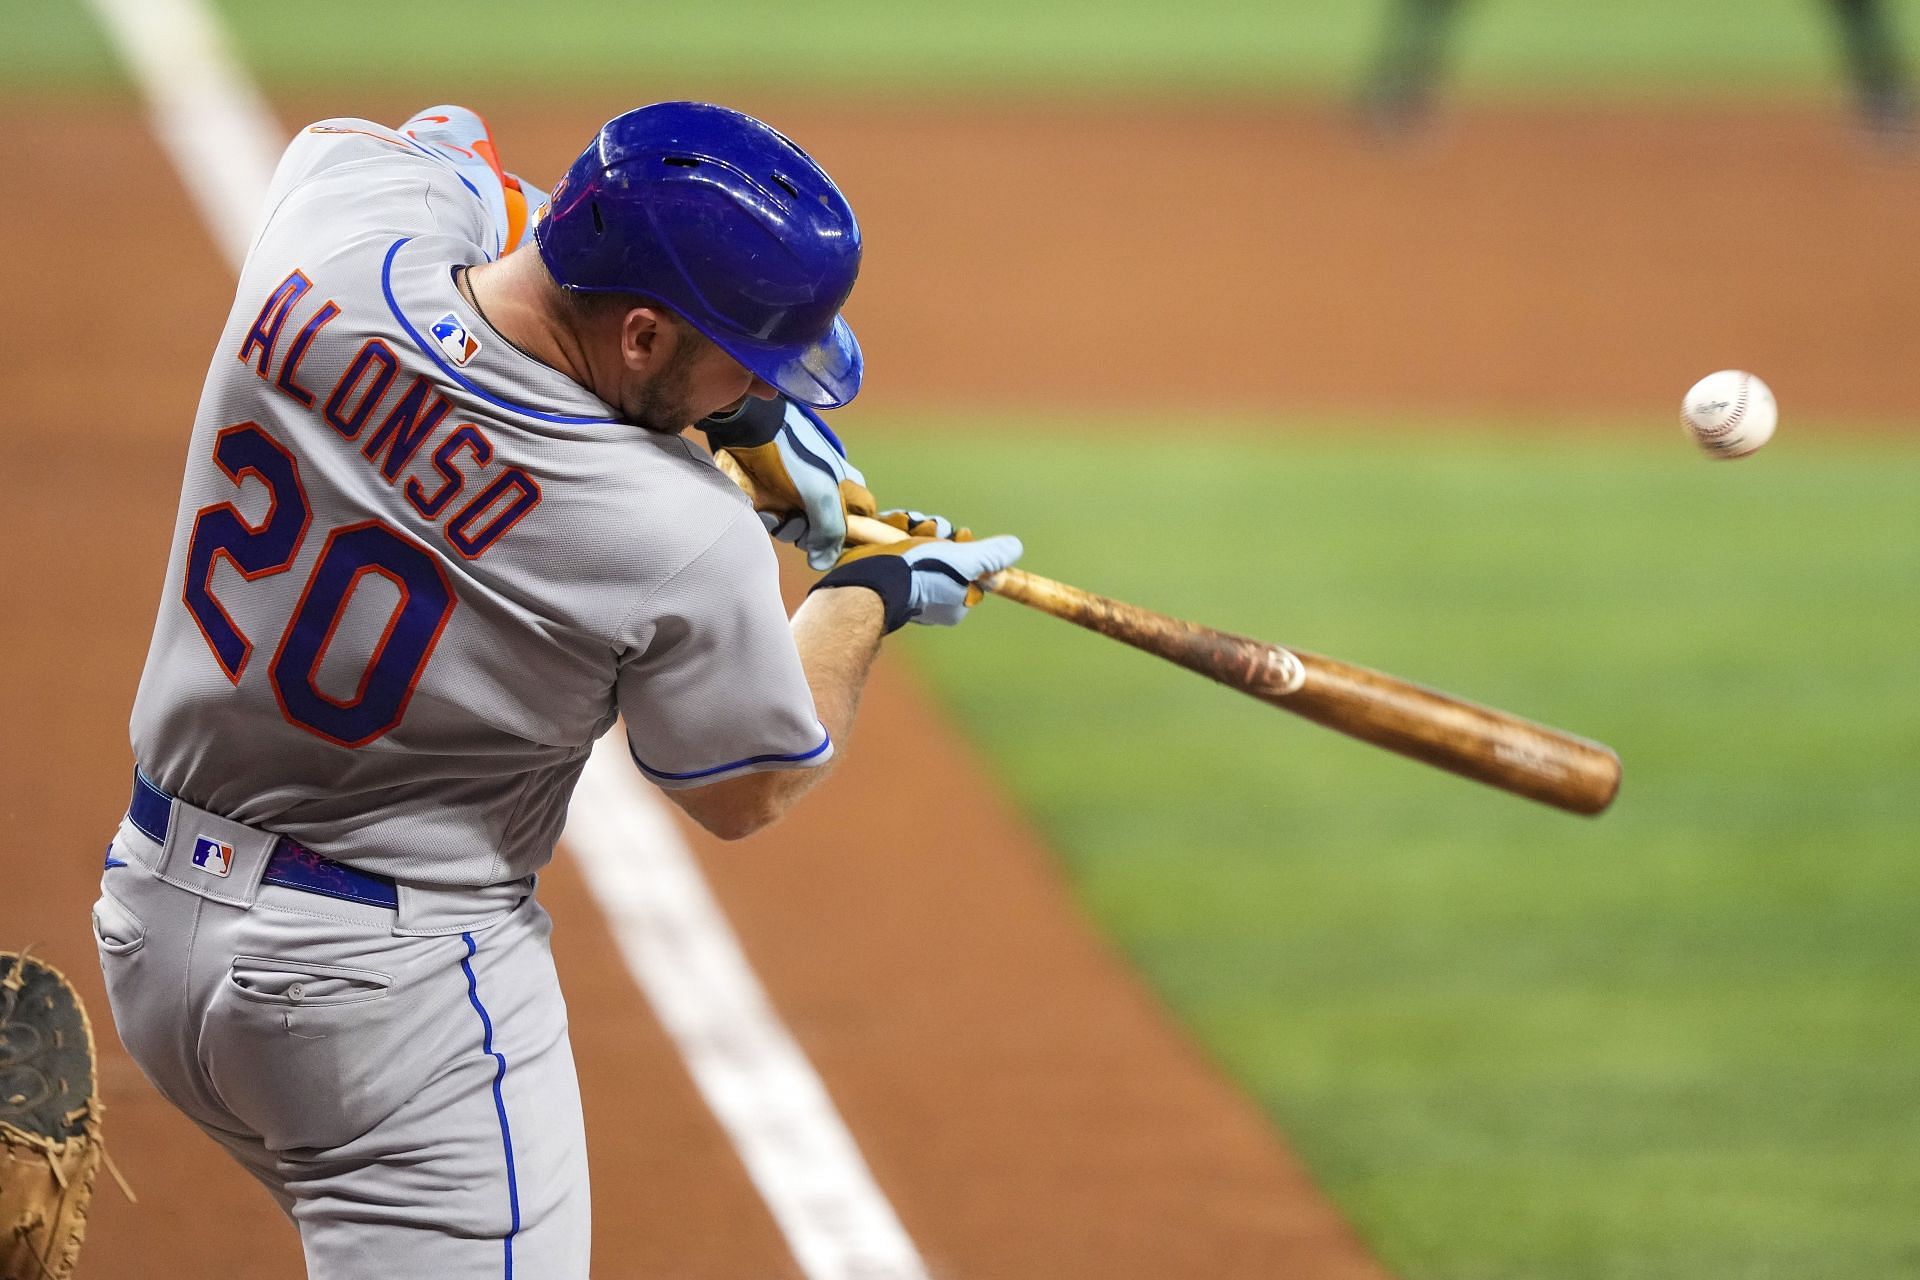 Pete Alonso of the New York Mets hits an RBI double.